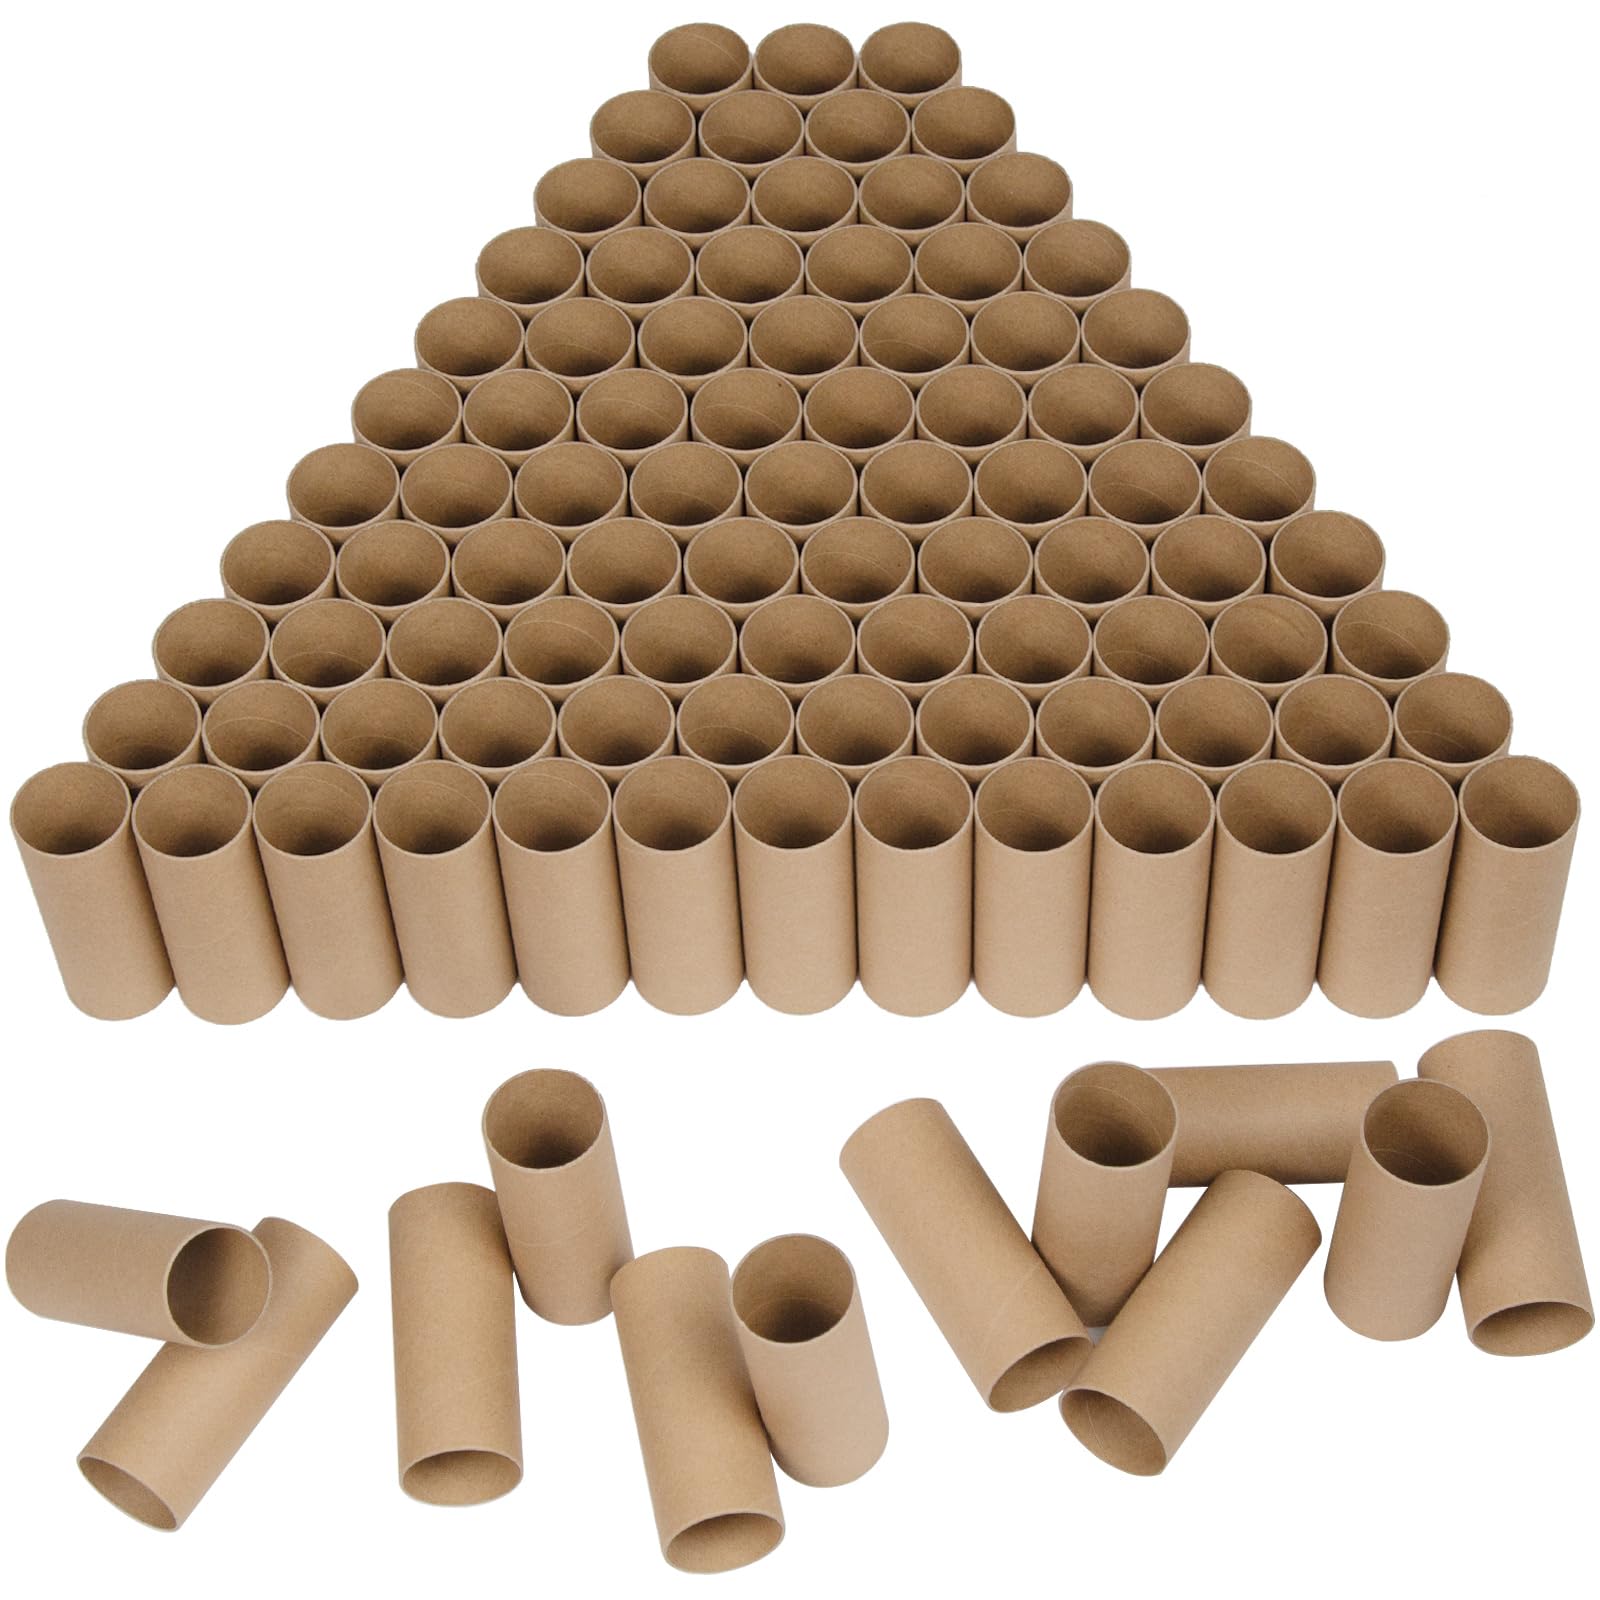 HESESOH 100 Pack Cardboard Tubes for Crafts - 1.57 x 3.94 Inches - Brown Toilet Paper Empty Rolls Round Thick Tubes Sturdy for Classroom Family Handmade DIY Projects